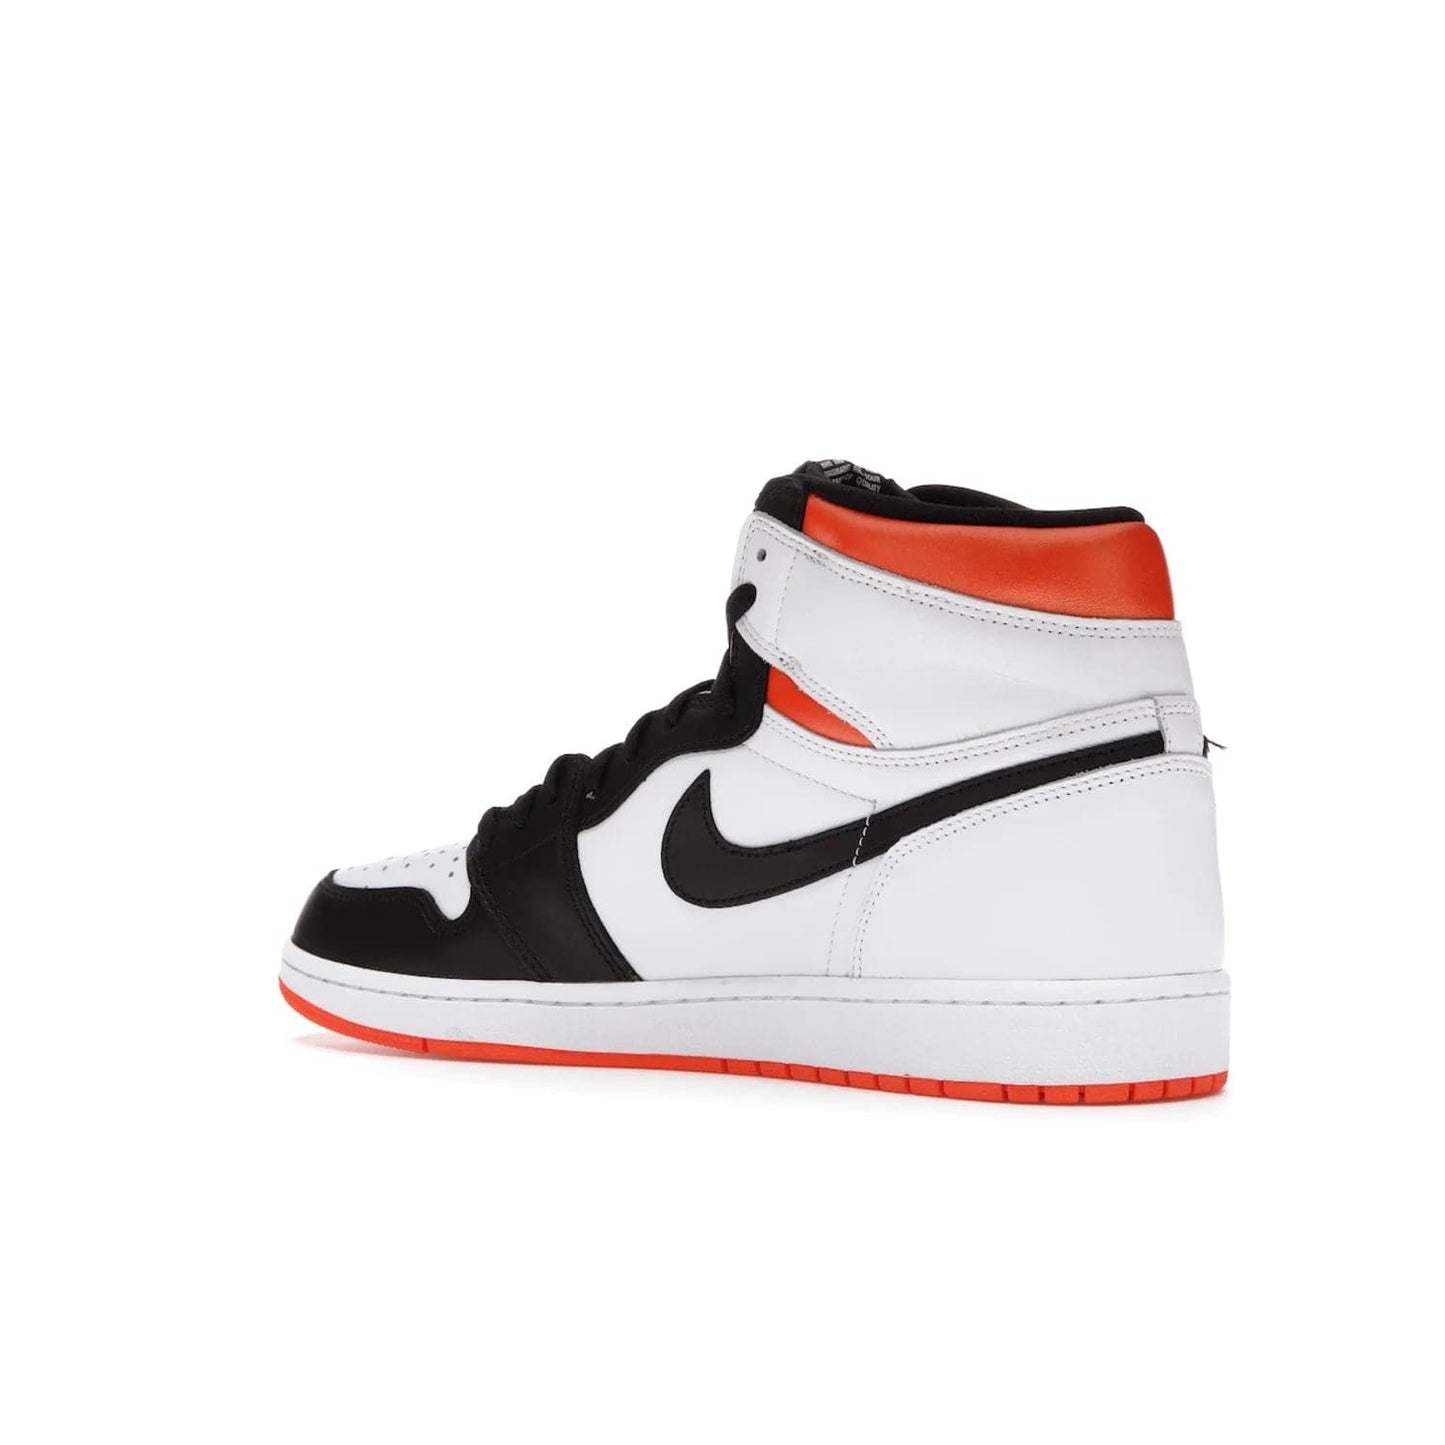 Jordan 1 Retro High Electro Orange - Image 23 - Only at www.BallersClubKickz.com - This Air Jordan 1 Retro High Electro Orange features a white leather upper with black overlays and vibrant Hyper Orange ankle wrap. Turn heads with this iconic design of woven tongue label and sole. Get yours today and add some serious style to your rotation.